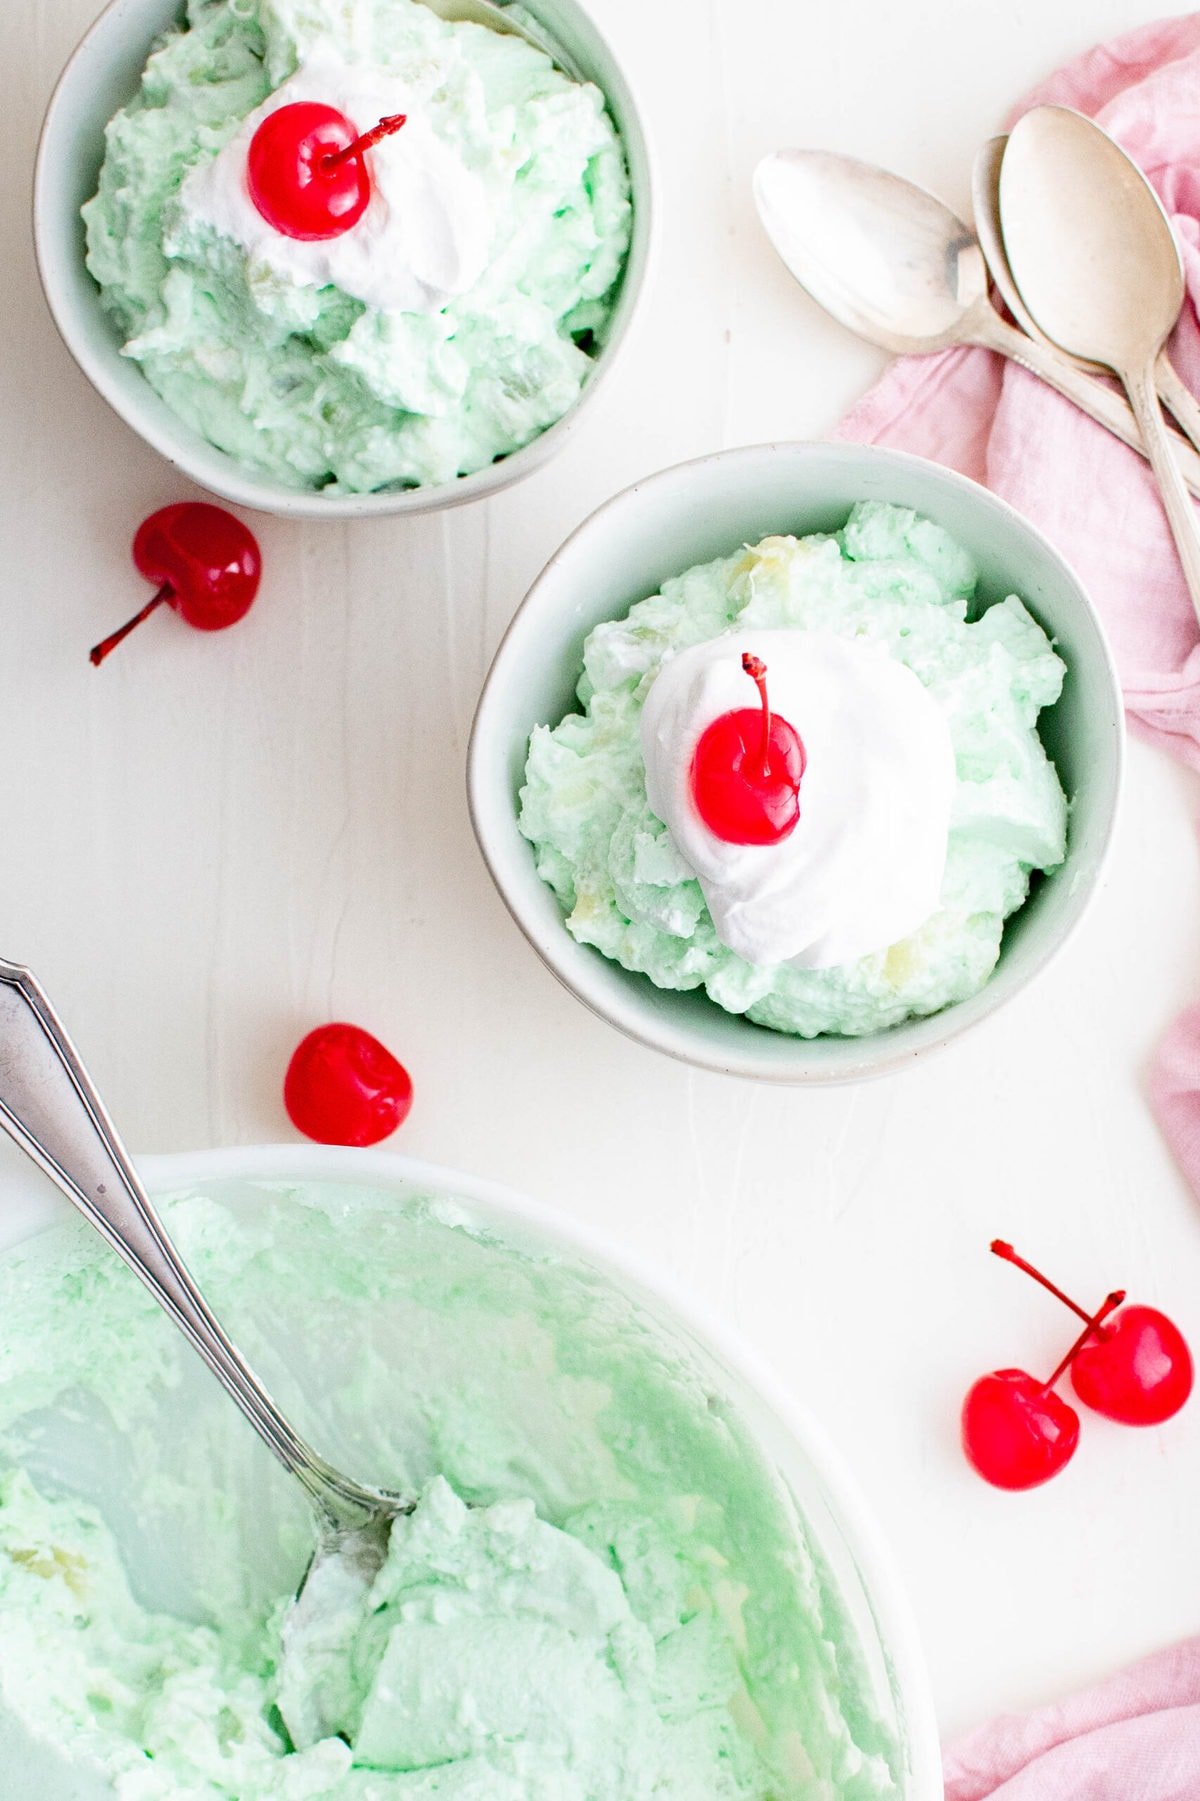 dishes with jello salas, whipped cream and cherries